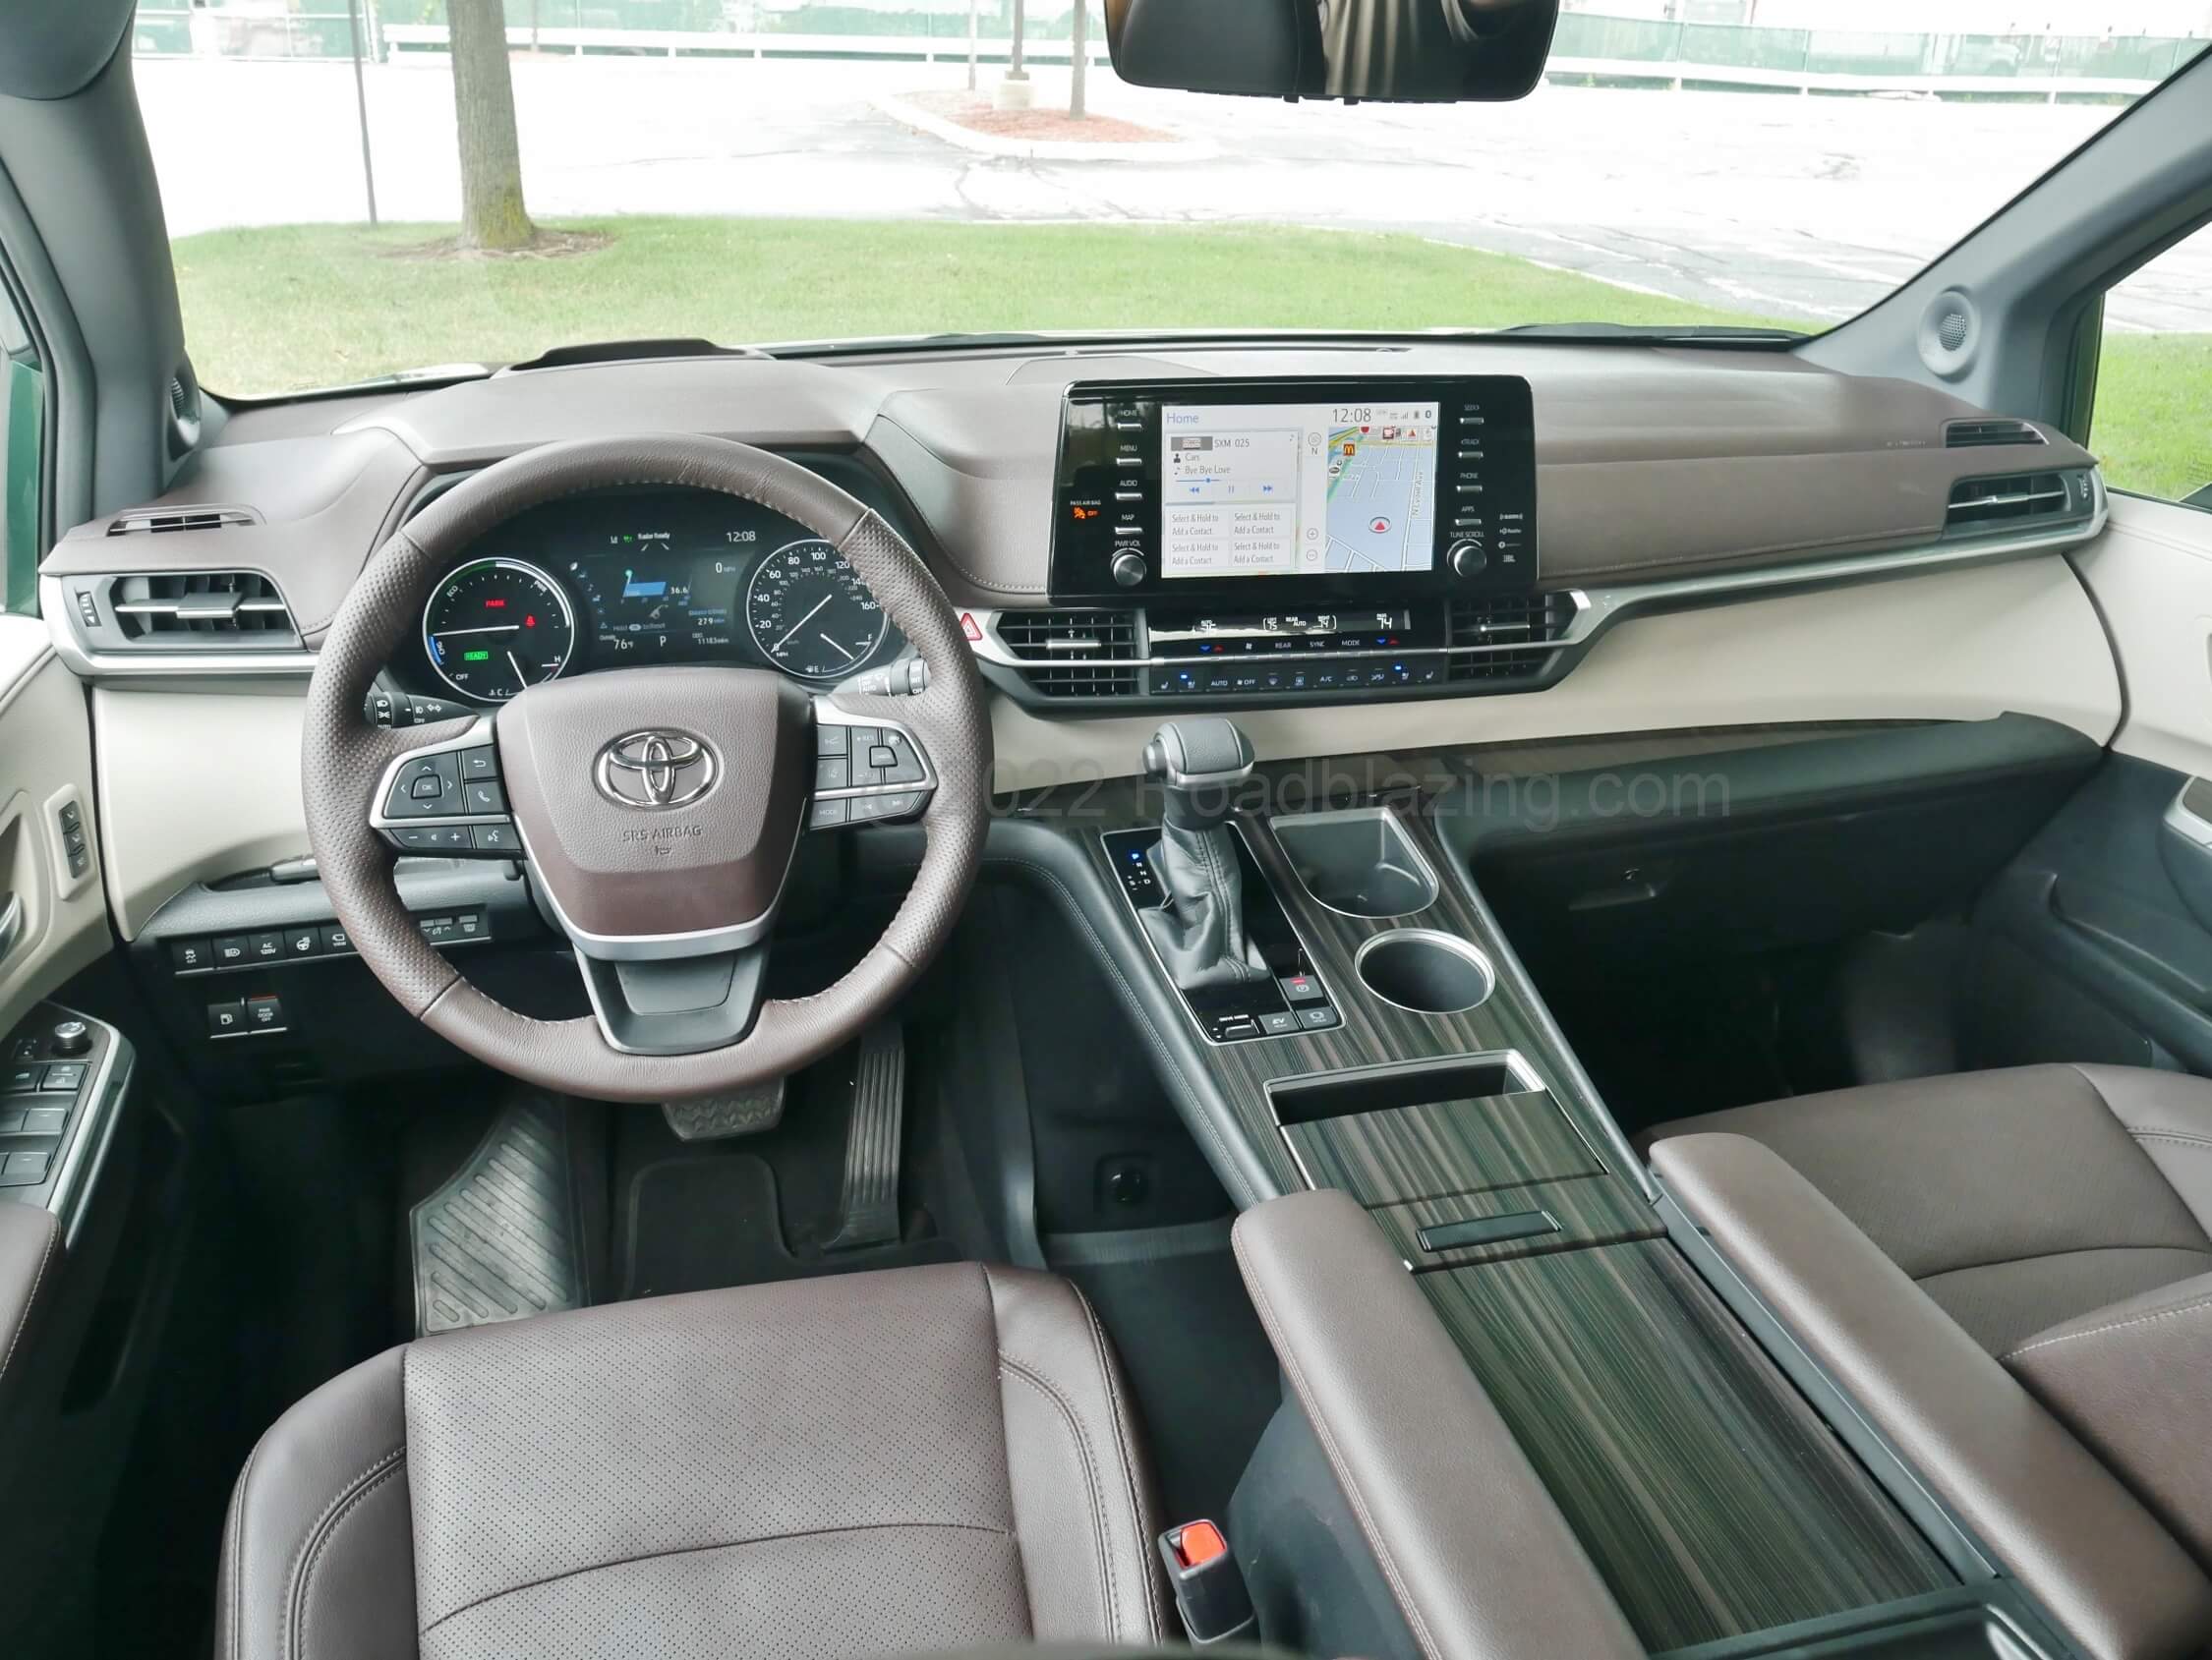 2021 Toyota Sienna Hybrid Platinum AWD: two tone tiered soft dash panels, oversized switches and a large 12.3" landscape media display emit modern luxury